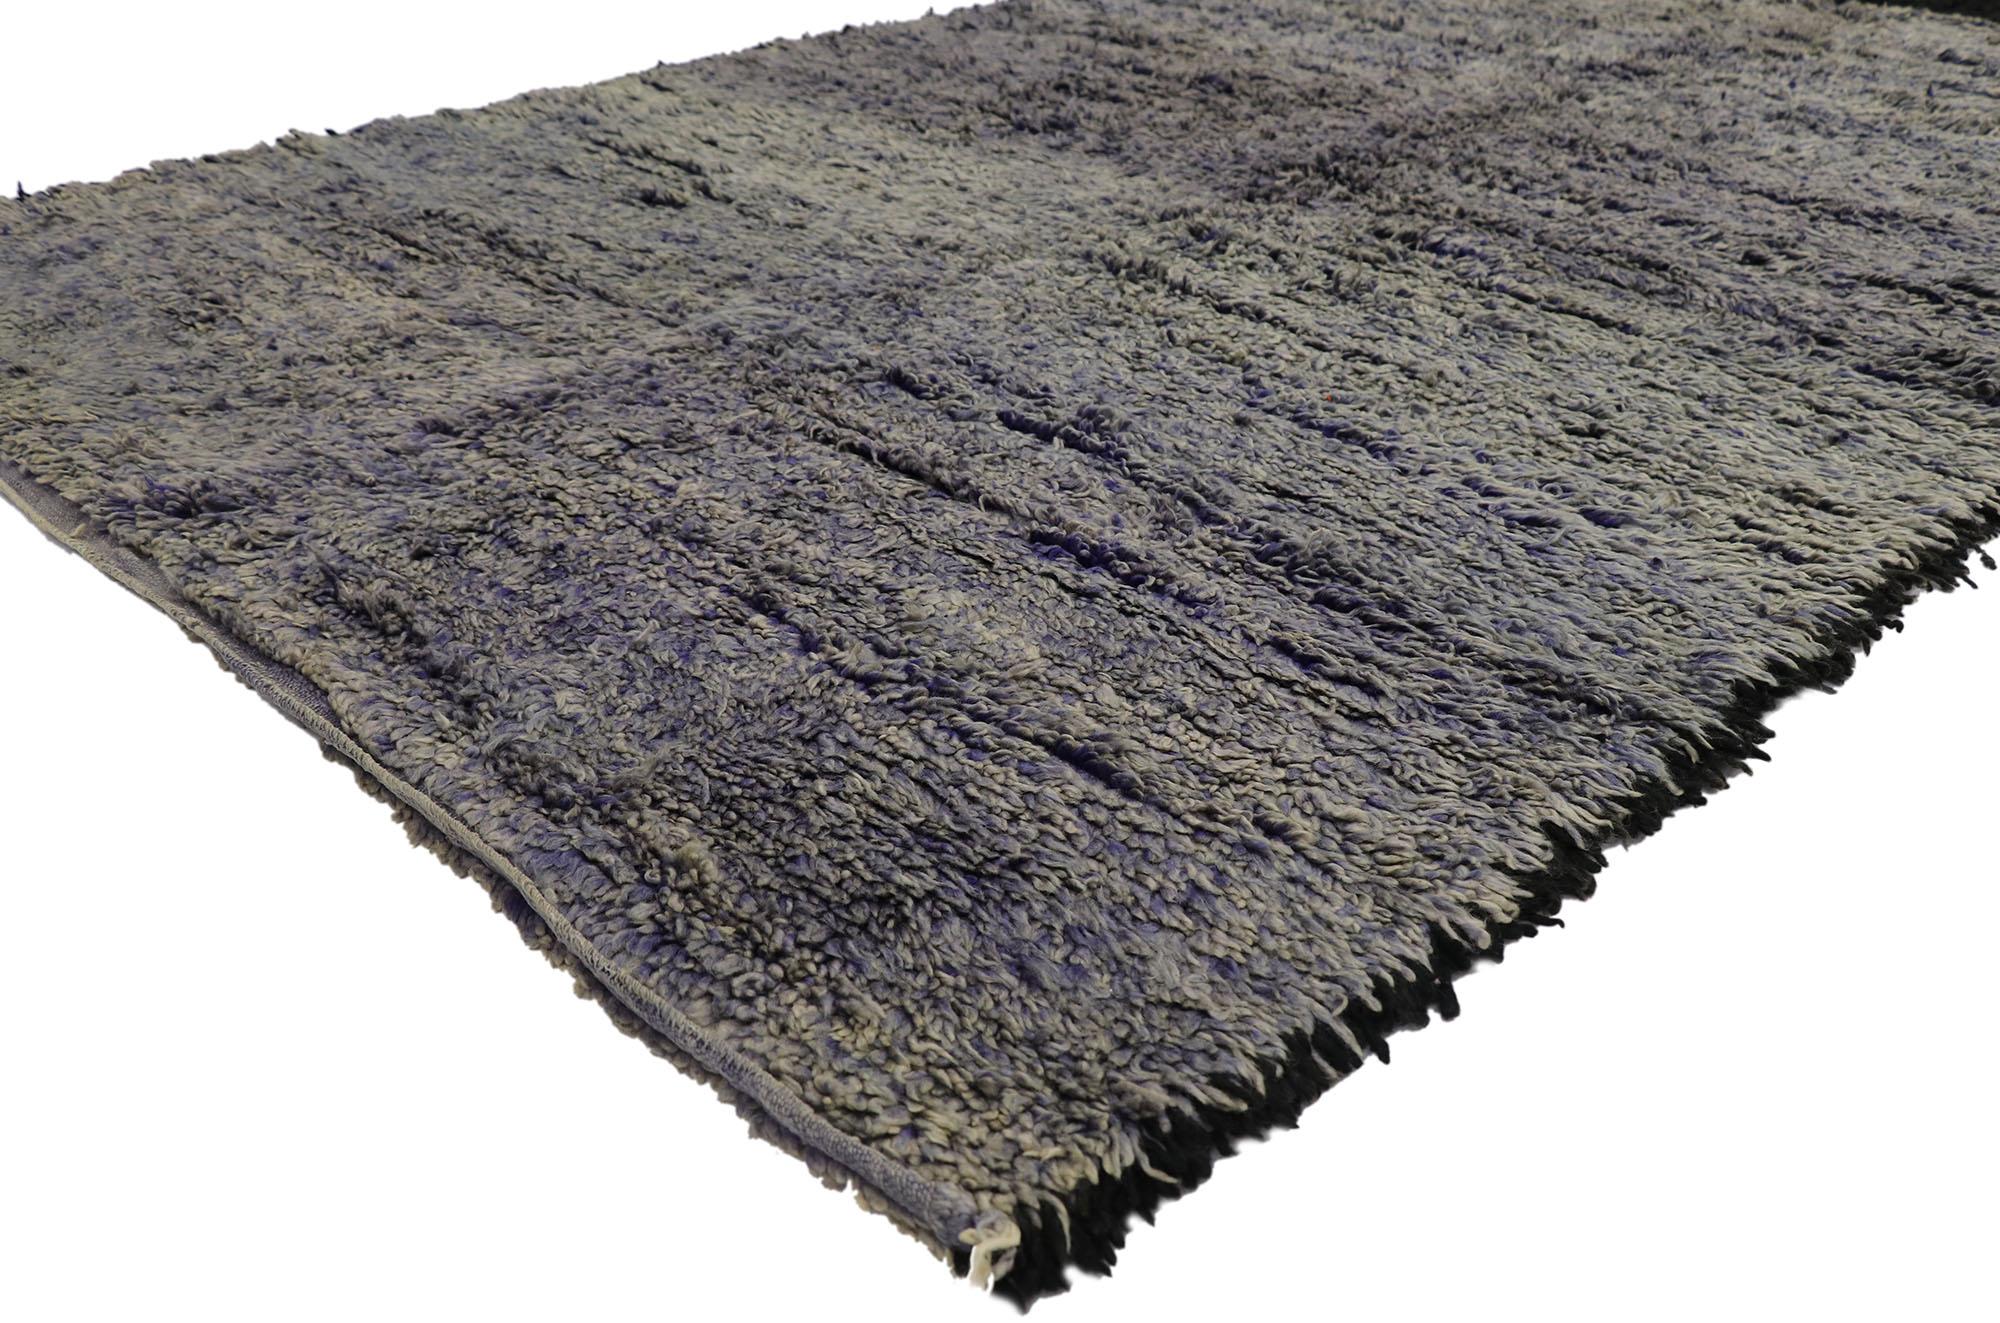 21314 Vintage Beni Mrirt Moroccan Rug, 06'02 x 10'03.
Nomadic charm meets Abstract Expressionism in this hand-knotted wool vintage Beni Mrirt Moroccan rug. Imbued with black and purple hues, the rich waves of abrash and softly gradated striations